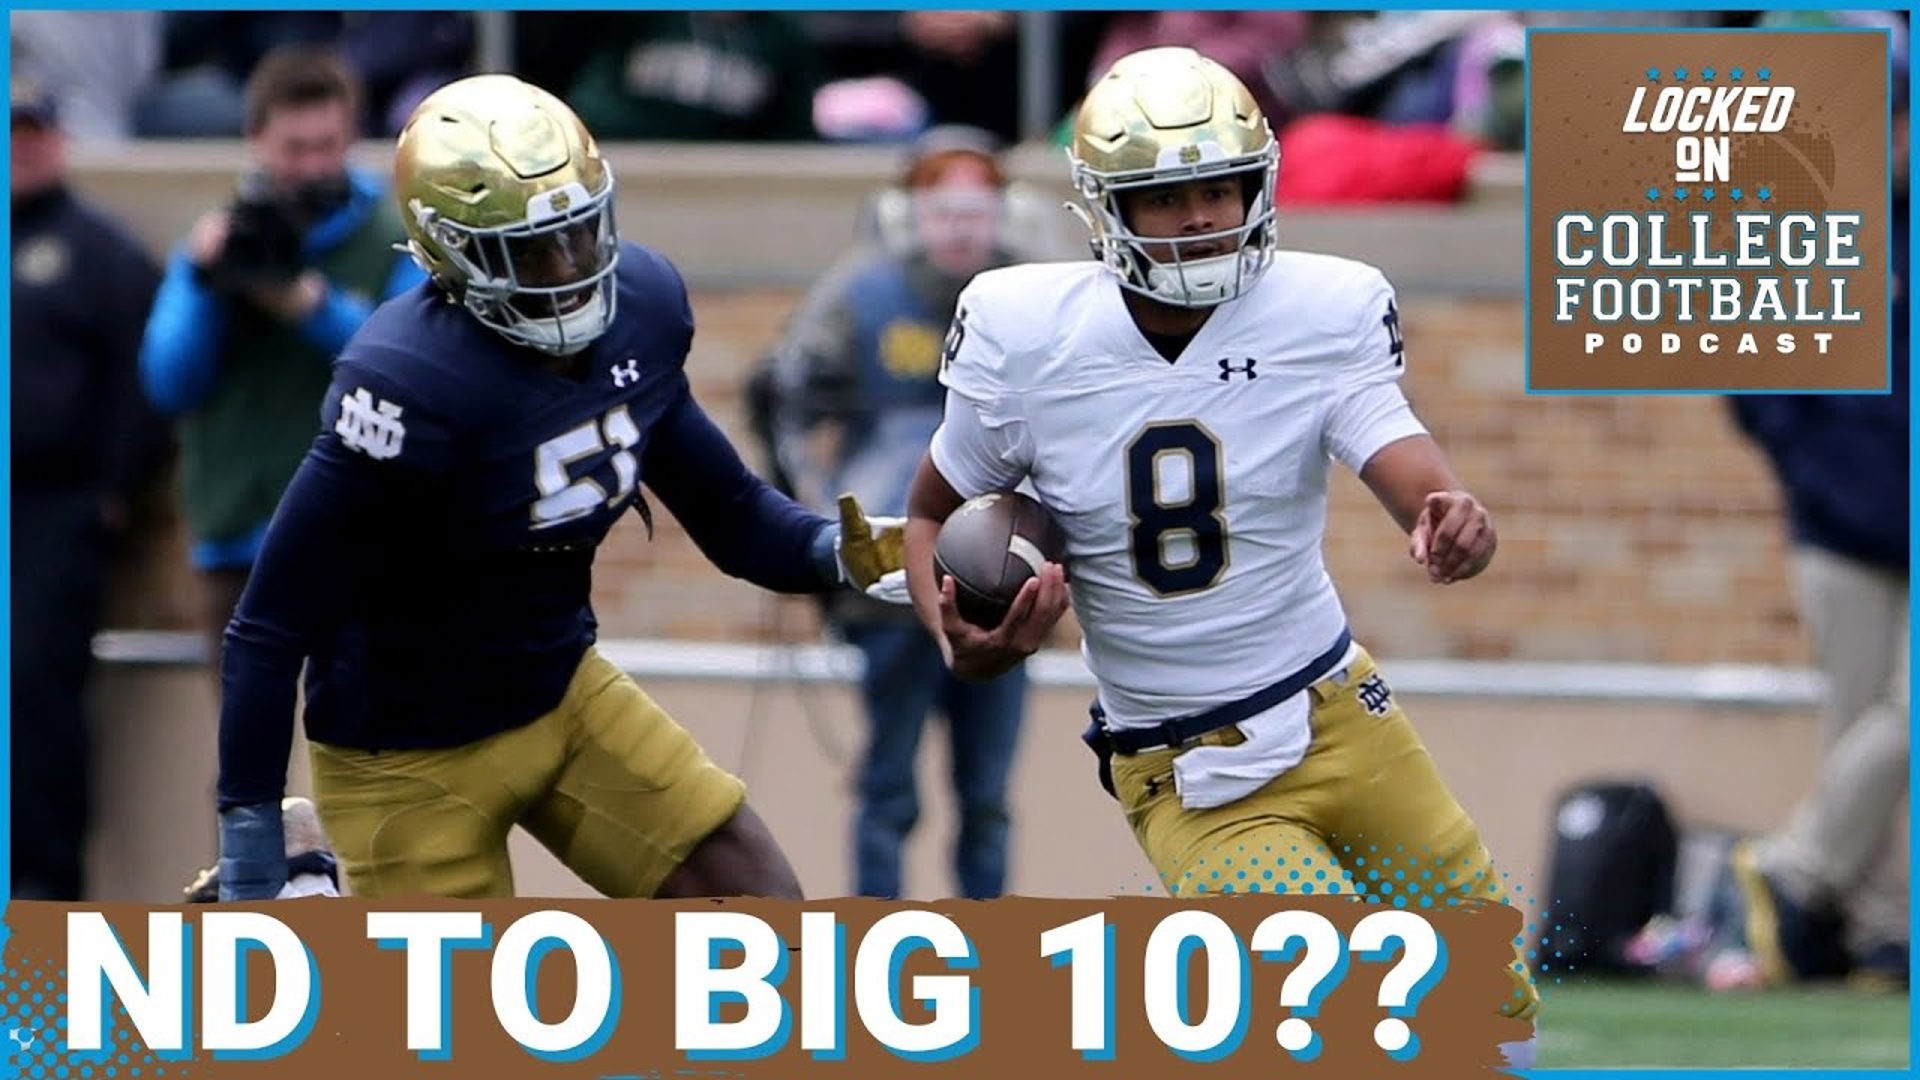 Notre Dame has been an independent in college football since the dawn of time. Are the Fighting Irish bound to join a conference like the Big 10 one day?